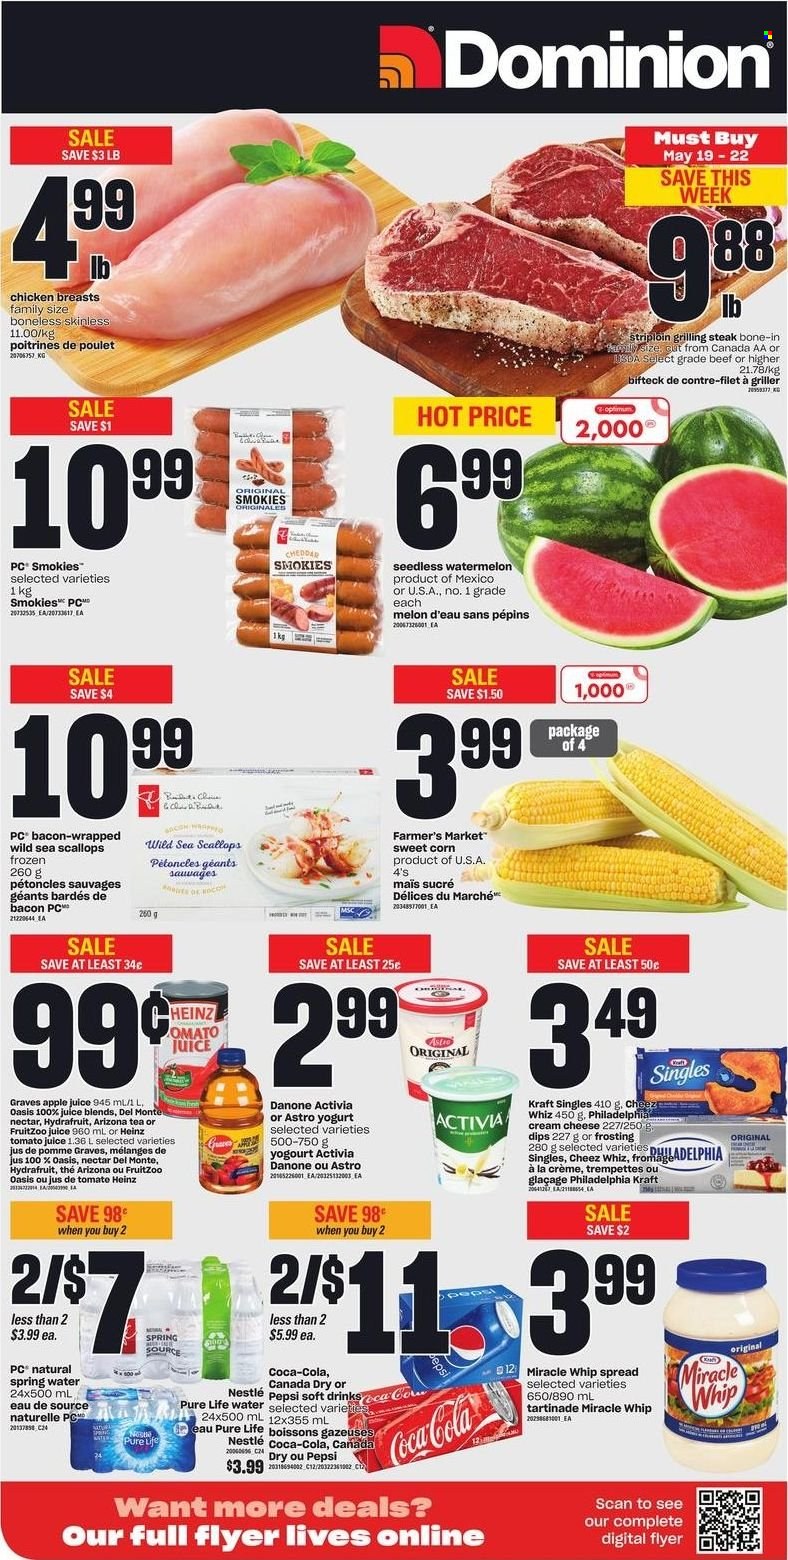 thumbnail - Dominion Flyer - May 19, 2022 - May 25, 2022 - Sales products - corn, sweet corn, watermelon, melons, scallops, Kraft®, bacon, cream cheese, sandwich slices, cheddar, cheese, Kraft Singles, yoghurt, Activia, Miracle Whip, frosting, apple juice, Canada Dry, Coca-Cola, Pepsi, juice, AriZona, spring water, tea, chicken breasts, Optimum, Nestlé, Heinz, Philadelphia, steak, Danone. Page 1.